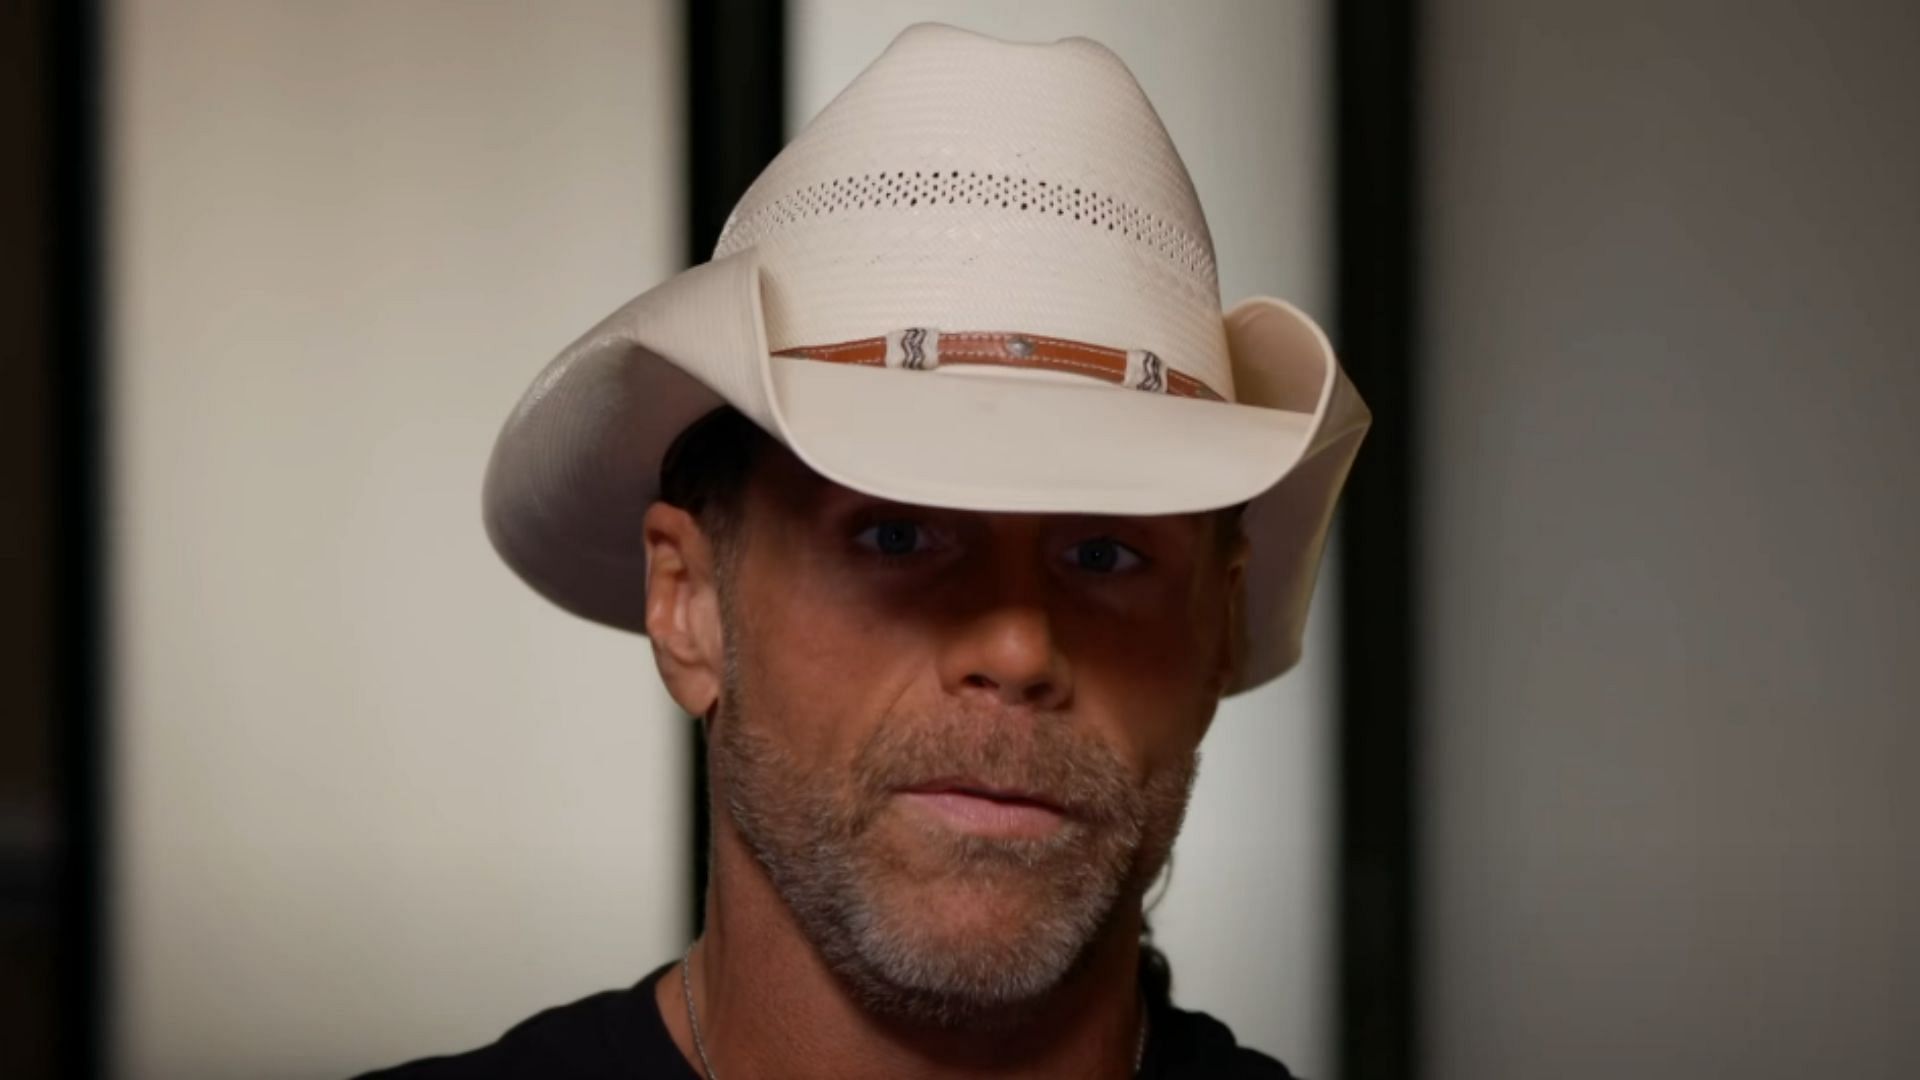 Shawn Michaels is widely viewed as one of WWE